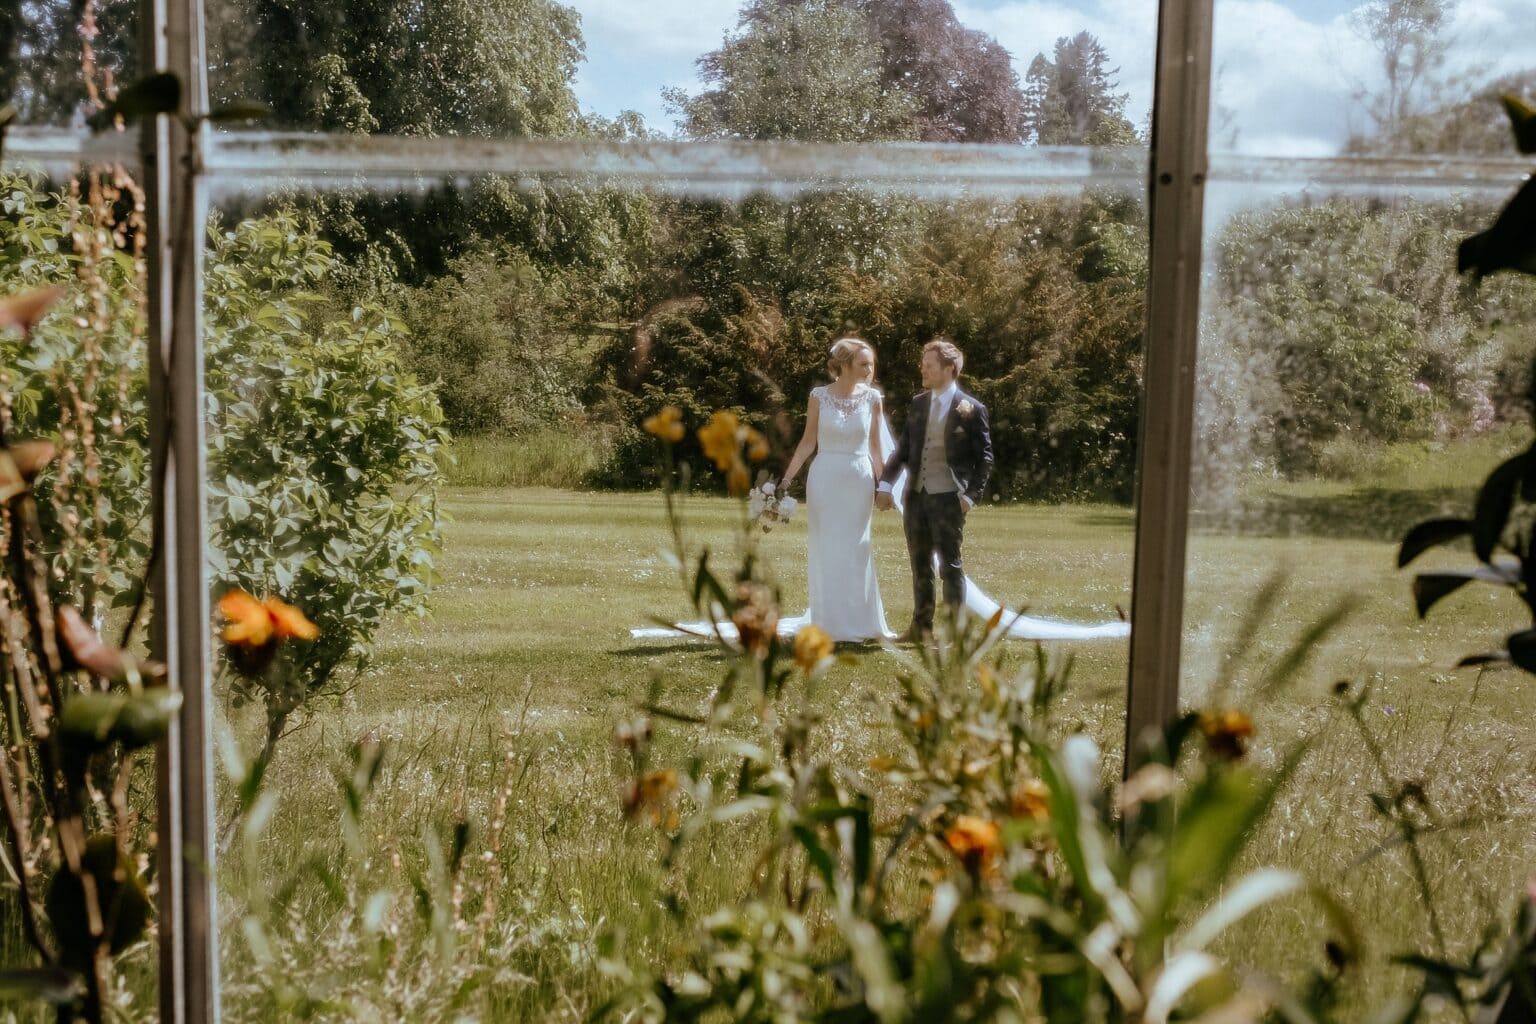 view from greenhouse of bride and groom walking through gardens on sunny day colstoun house wedding unique venues scotland unique wedding venue scotland